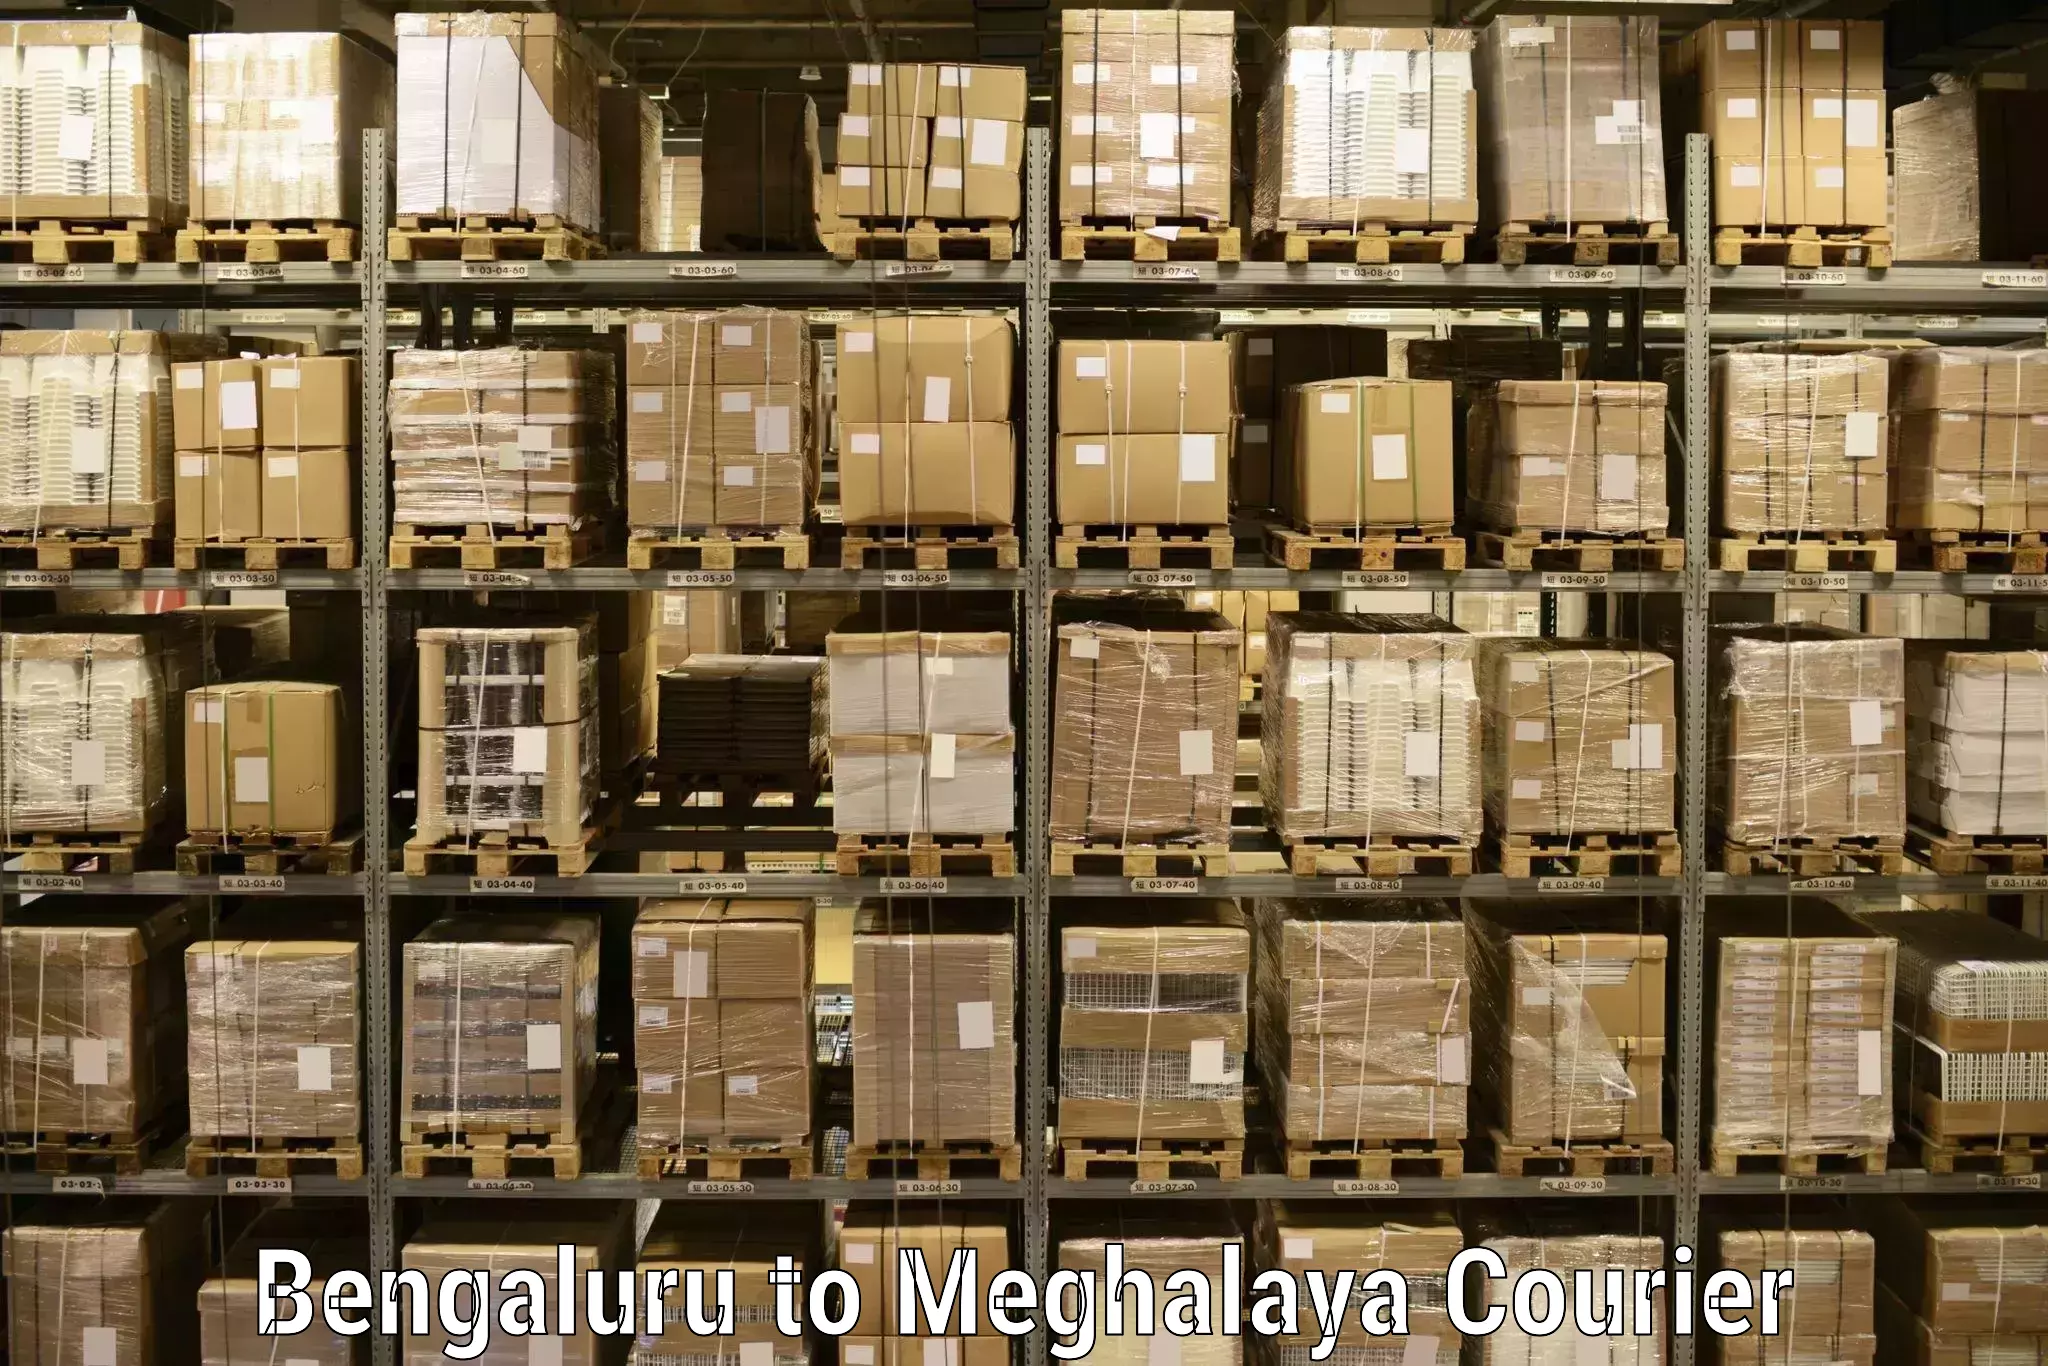 Round-the-clock parcel delivery in Bengaluru to Meghalaya